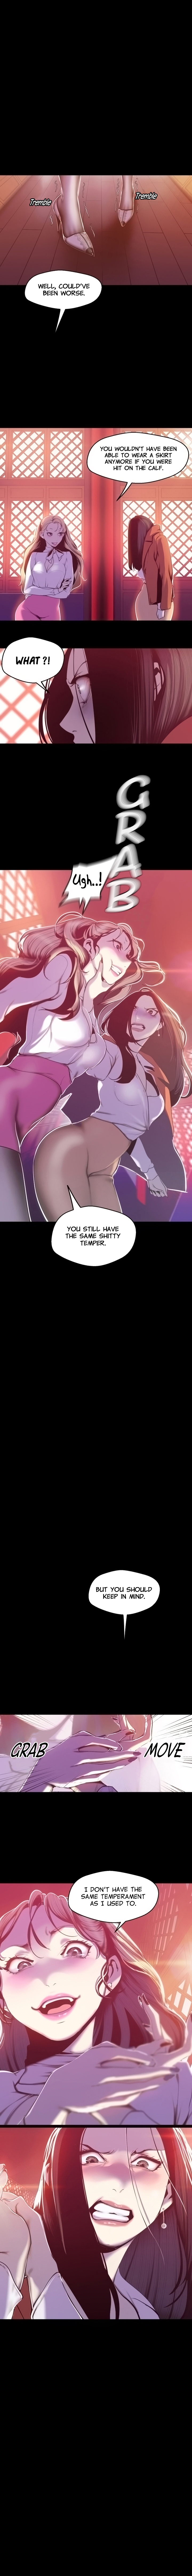 Panel Image 1 for chapter 69 of manhwa A Wonderful New World on read.oppai.stream